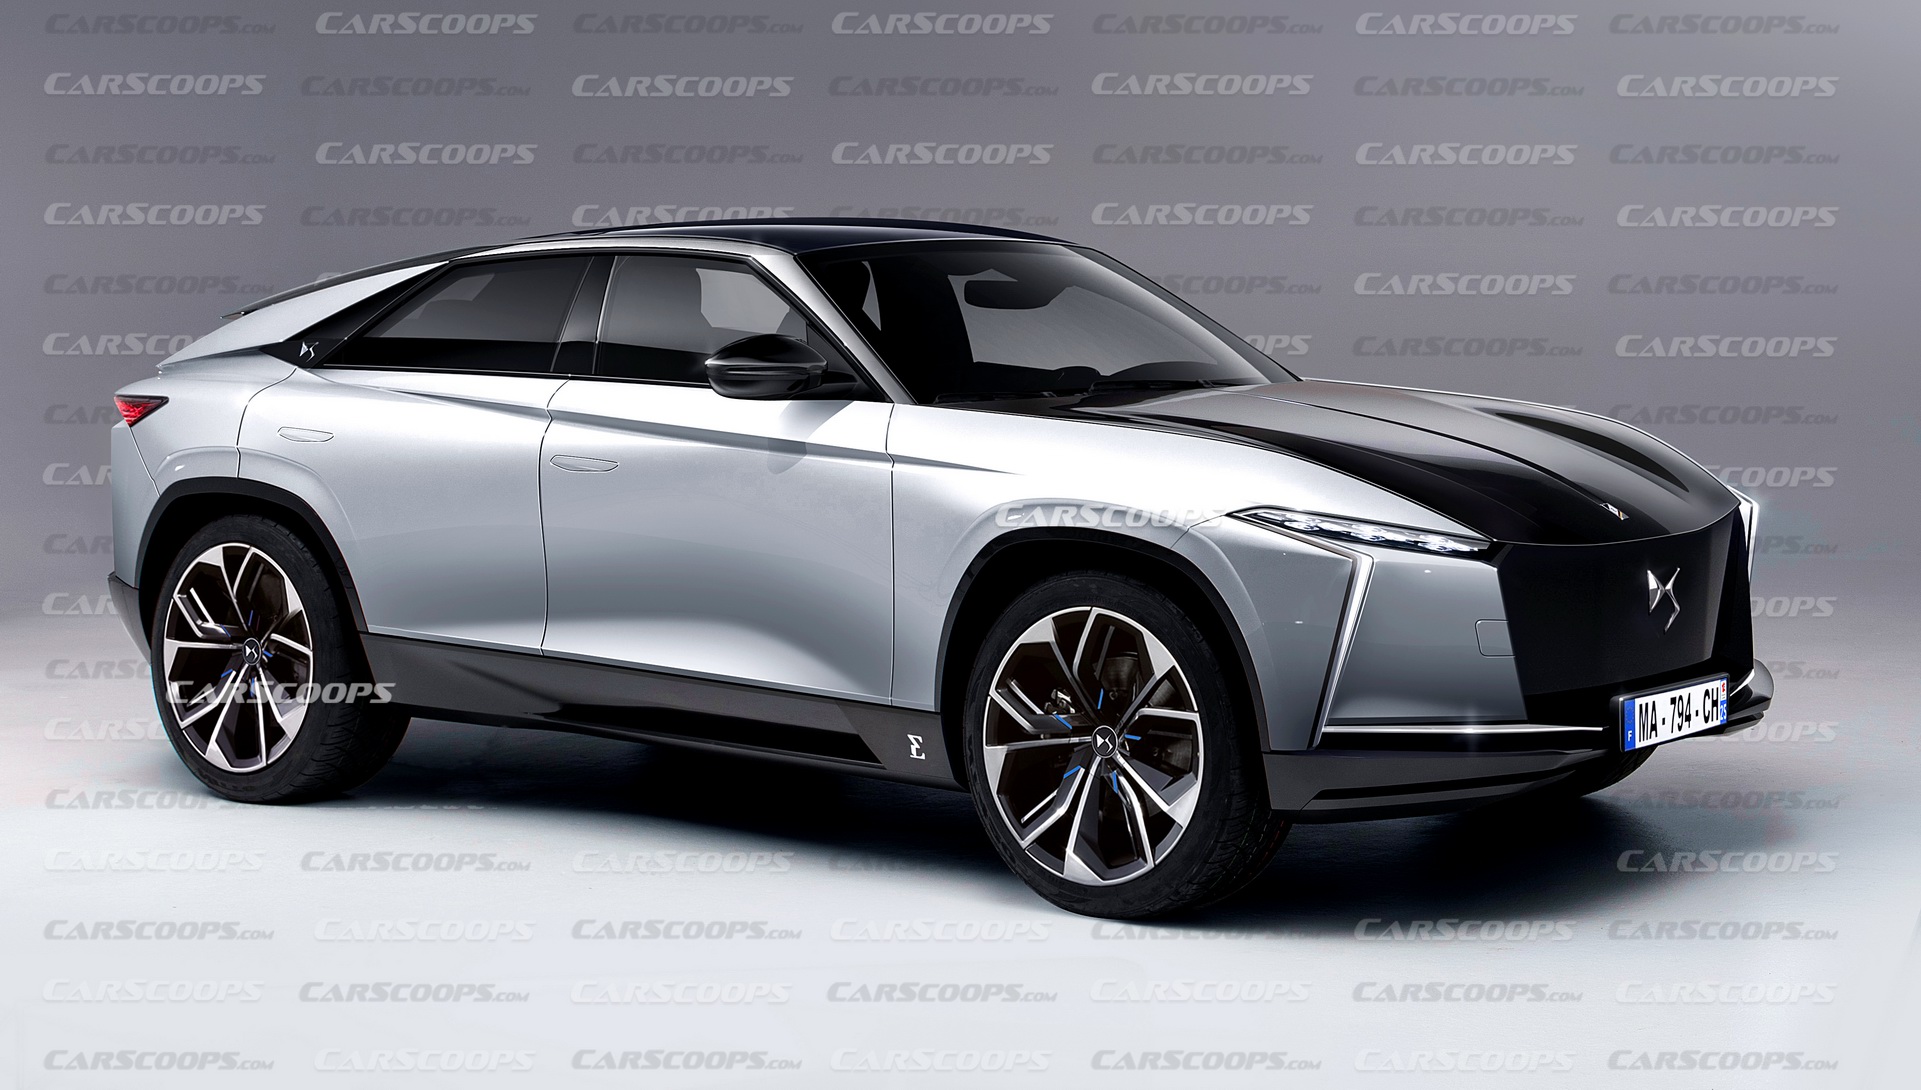 2023 DS 9 Crossback Crossover CarScoops 3 